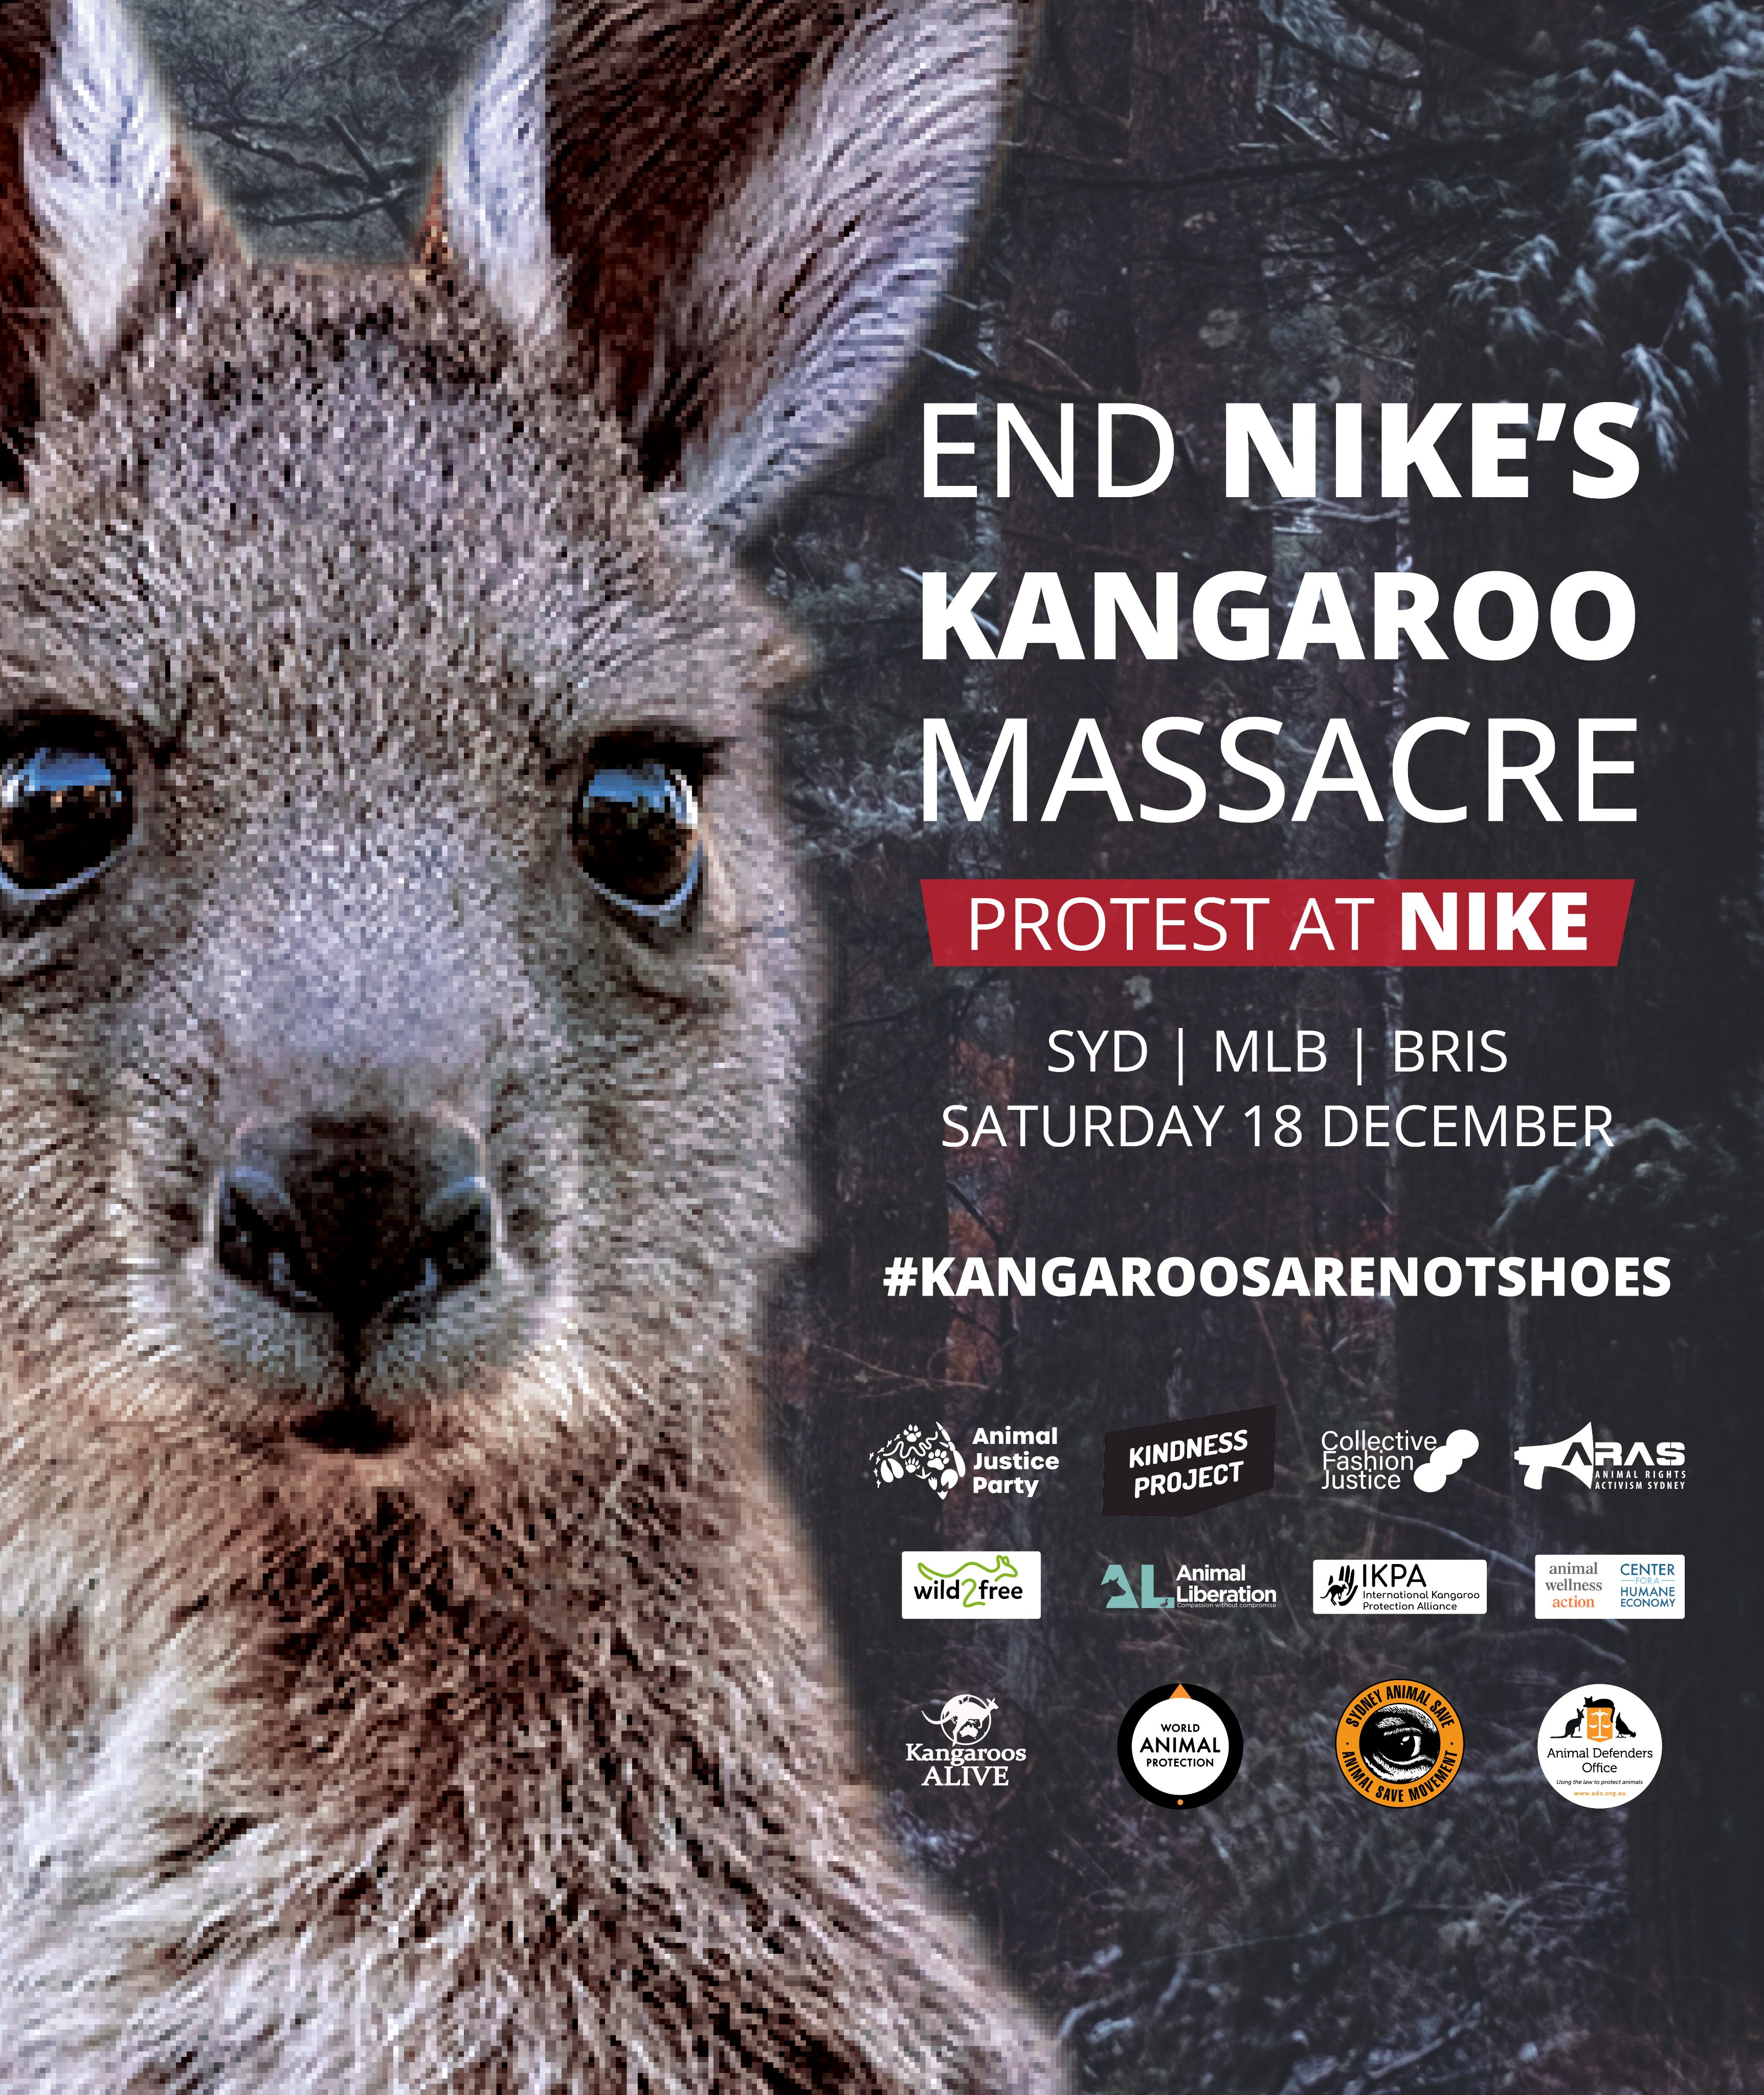 milla nautica Gorrión módulo Animal Justice Party NSW on Twitter: "Protest at @Nike with us!⚡Their  thirst for kangaroo leather is driving an unsustainable shooting spree  across Australia. Join our MPs @MlcHurst and @MarkPearsonMP at NIKE Flagship